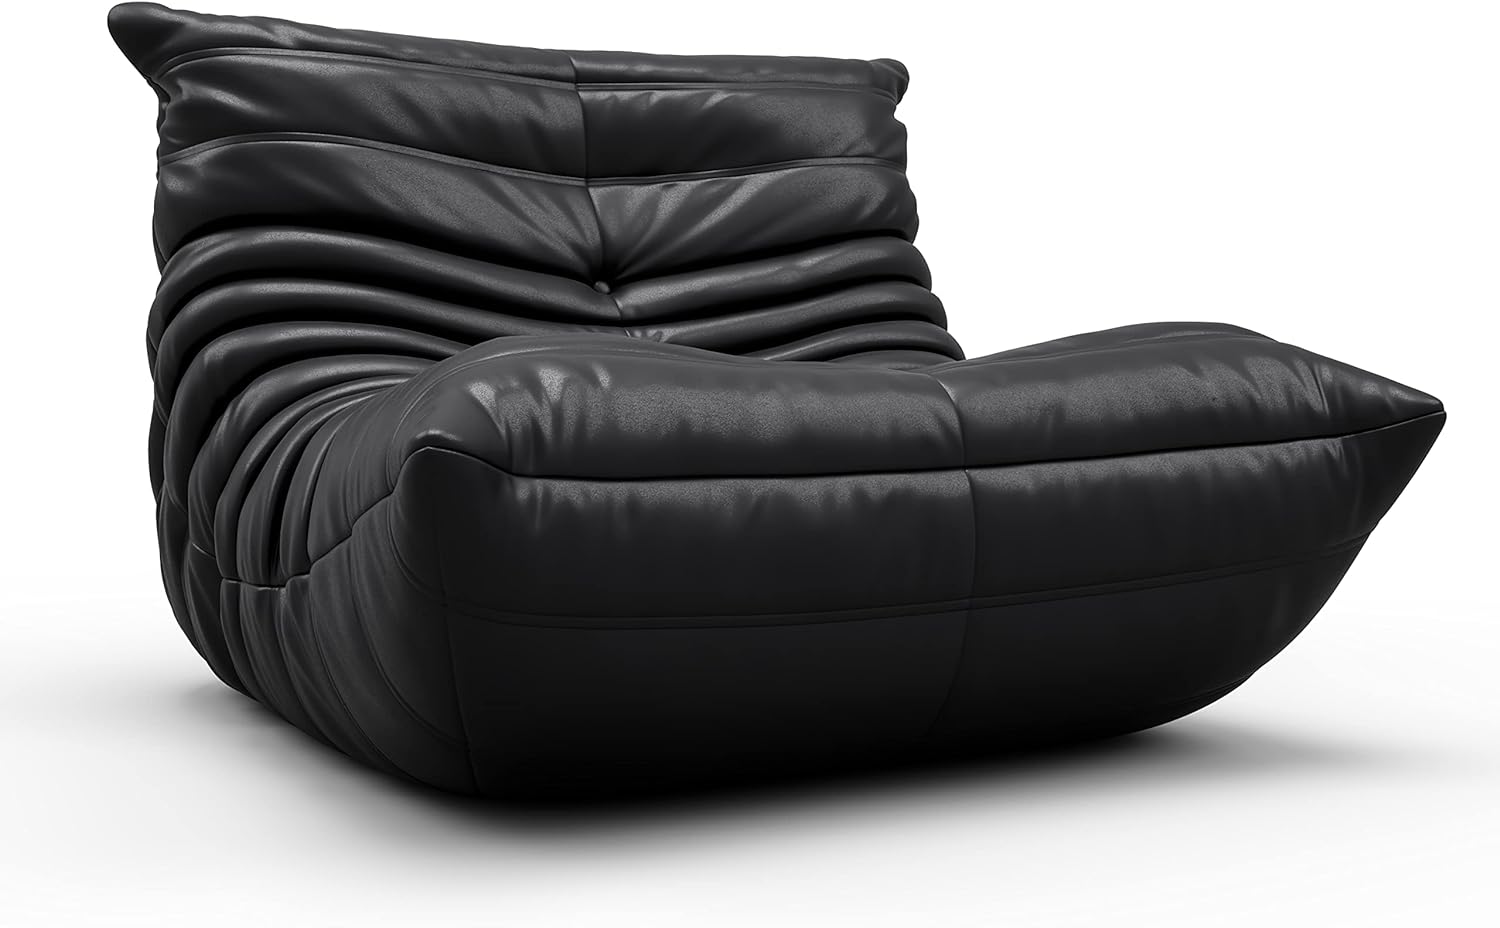 Soft Cool Lounge Chair - Comfortable Lazy Sofa - Soft Microfiber Leather Sofa - Gaming Room, Living Room